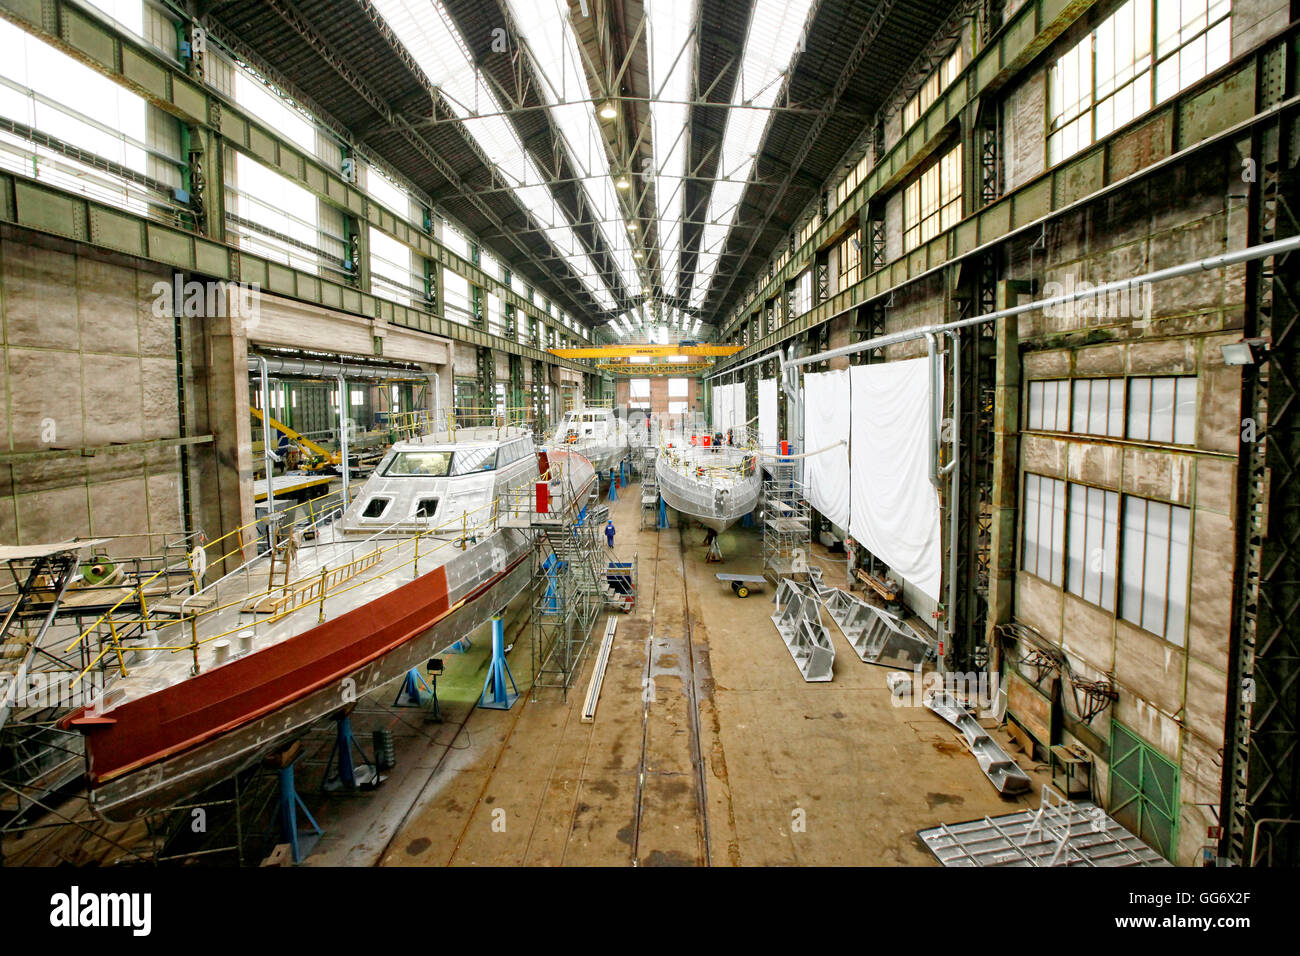 CMN, Constructions Mecaniques de Normandie, a privately owned shipyard located in Cherbourg, France, employs around 375 people. Stock Photo